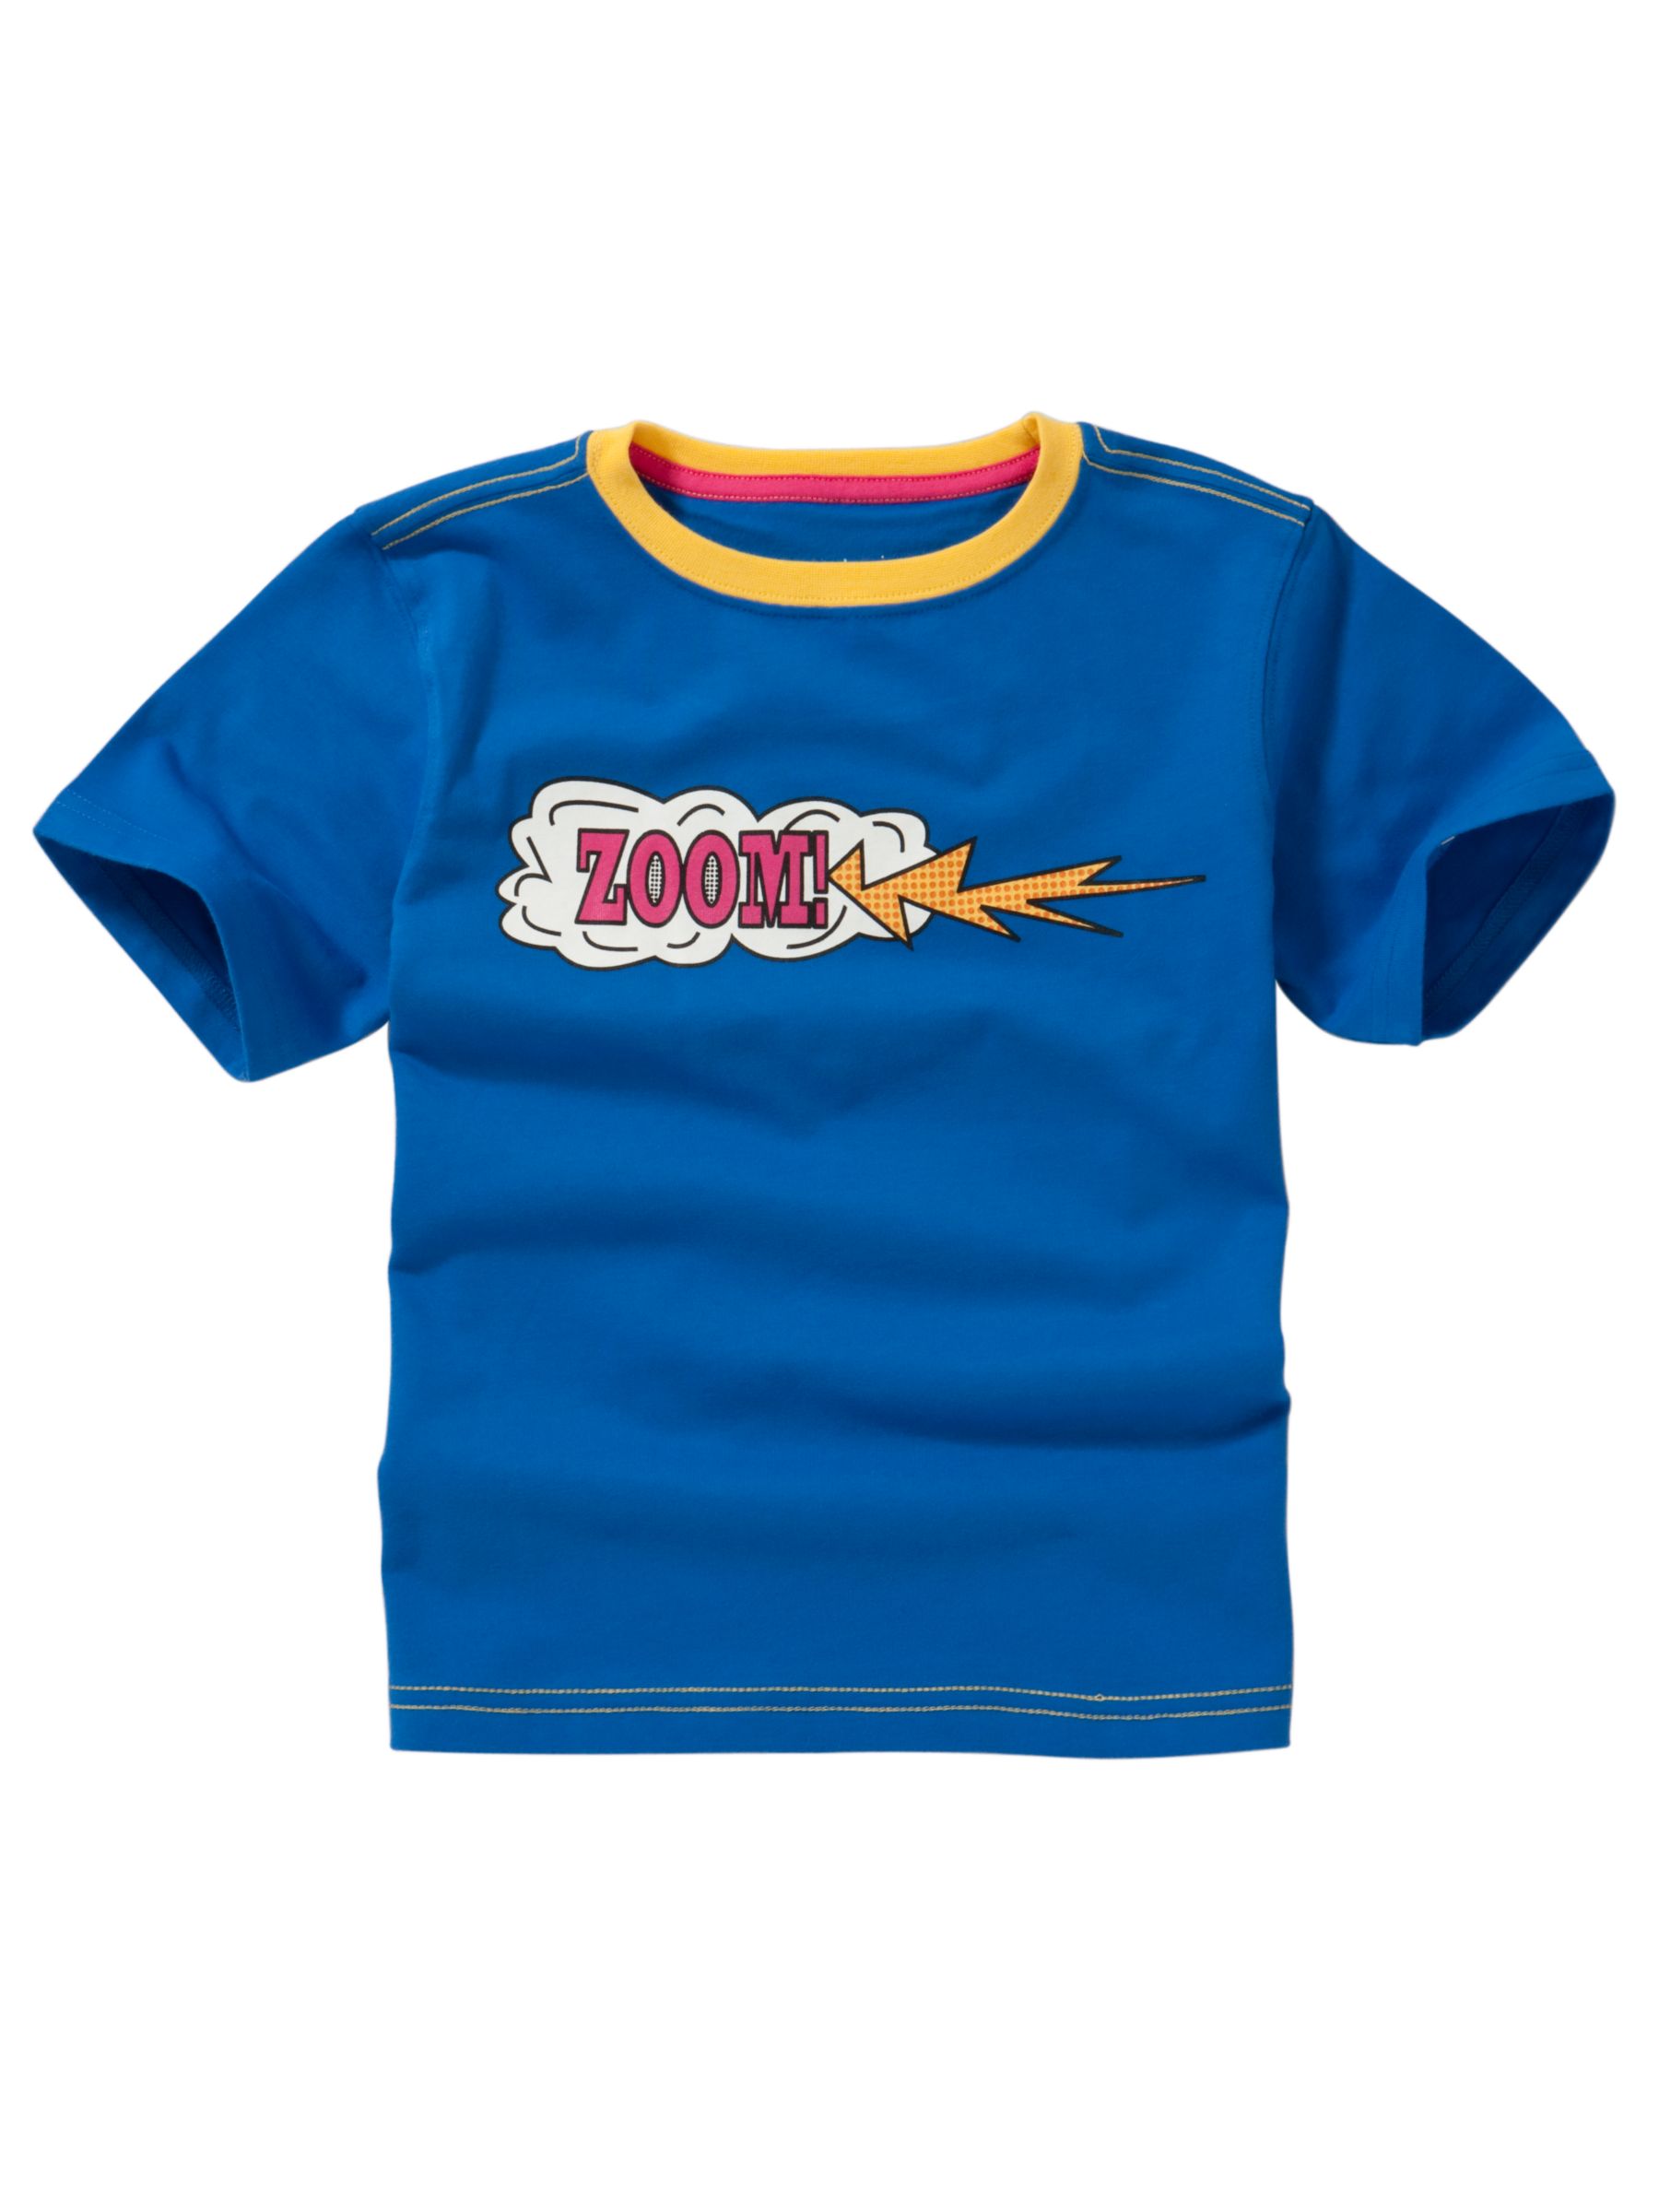 Zoom Graphic T-Shirt, Blue